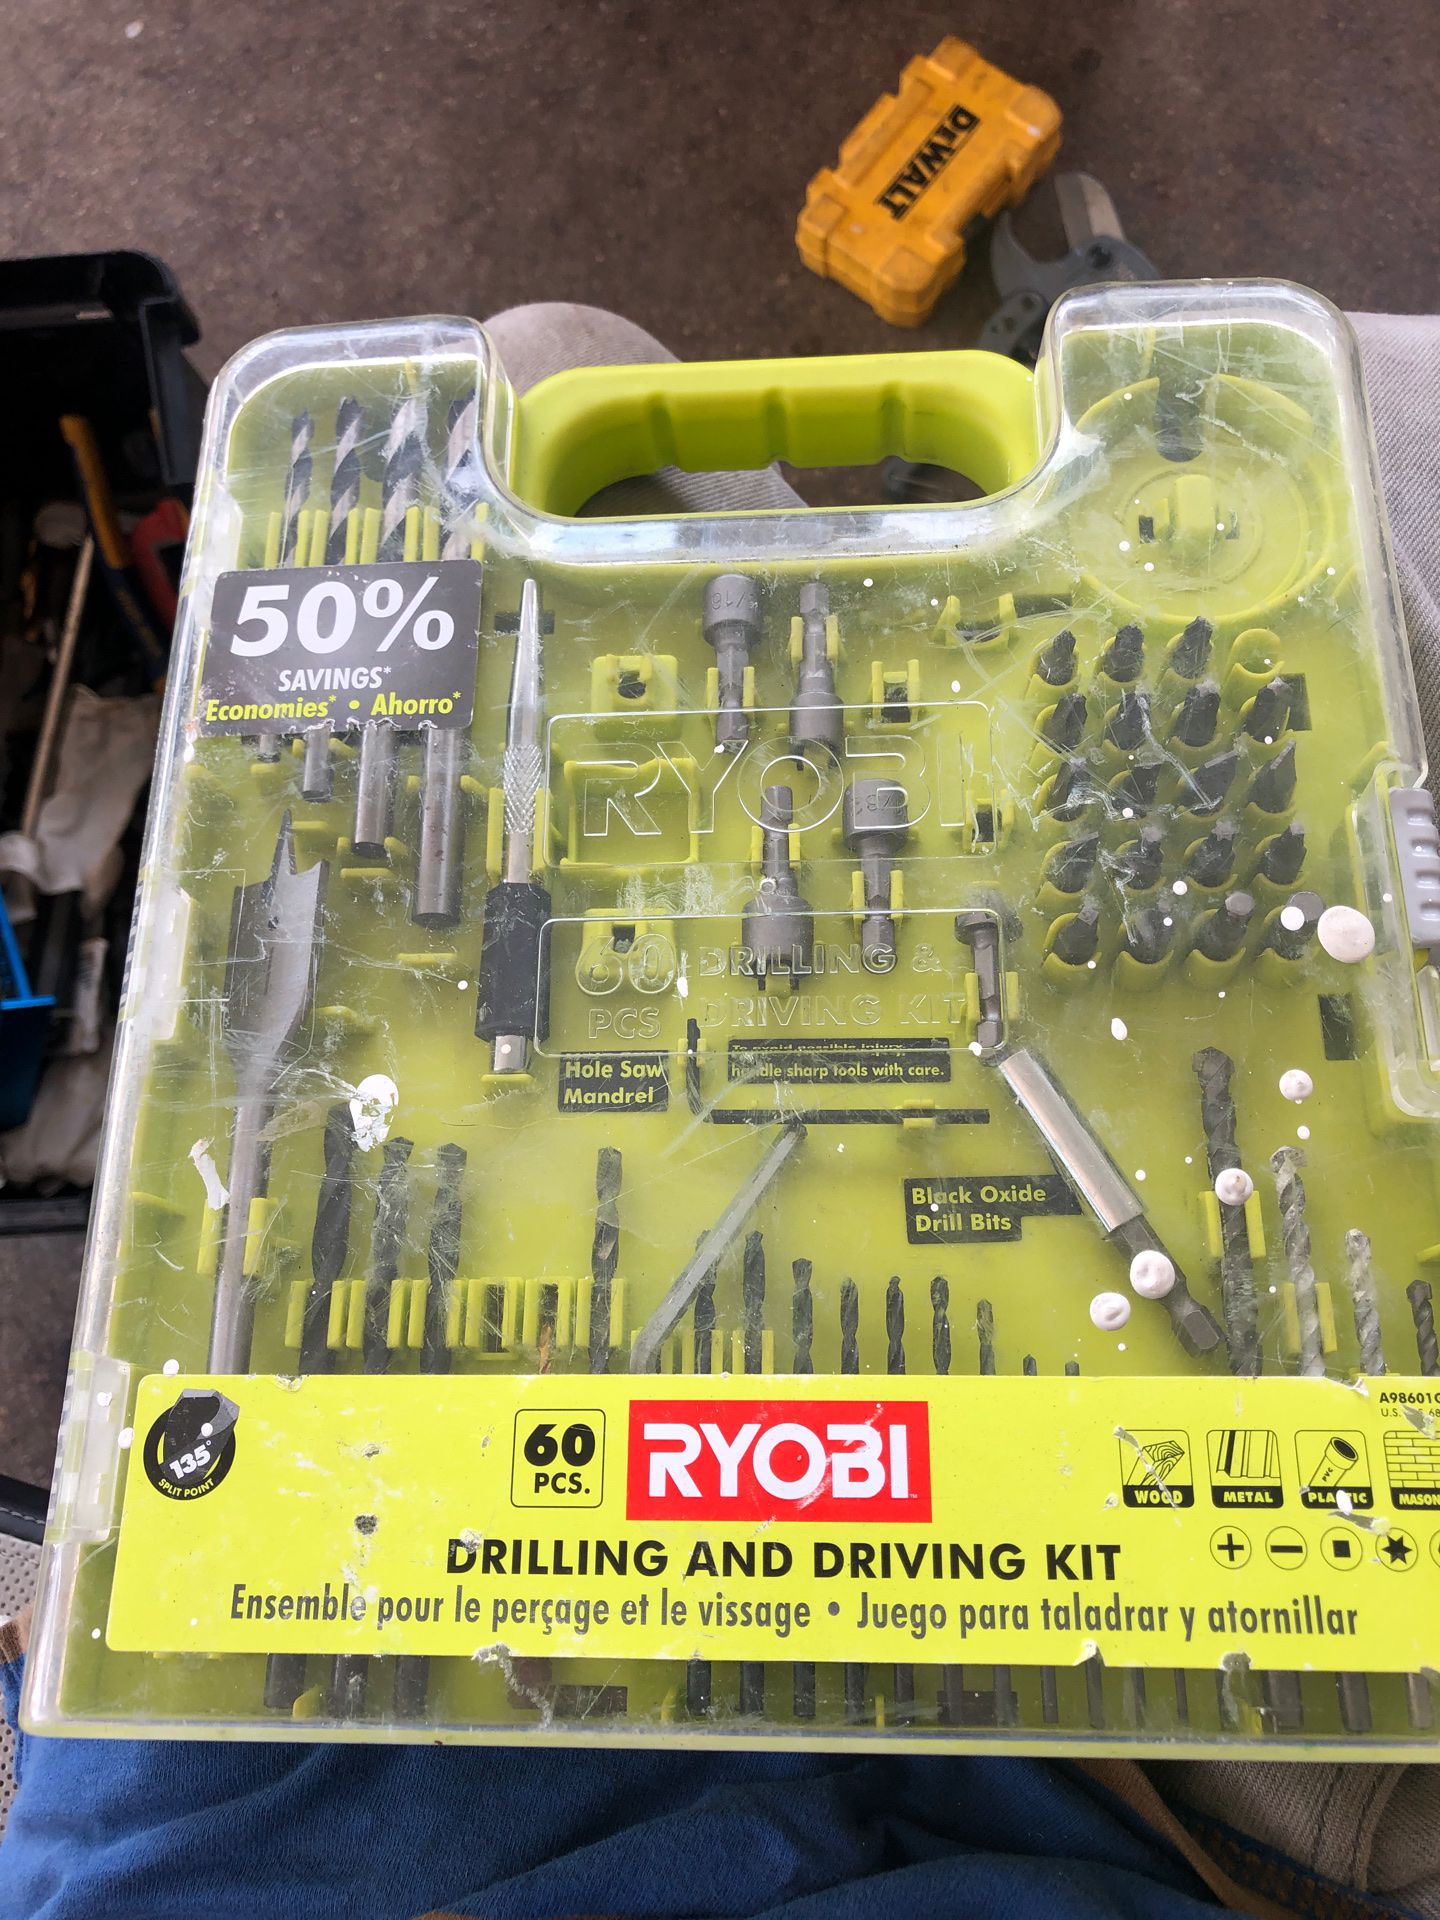 Rioby drilling and driving kit.